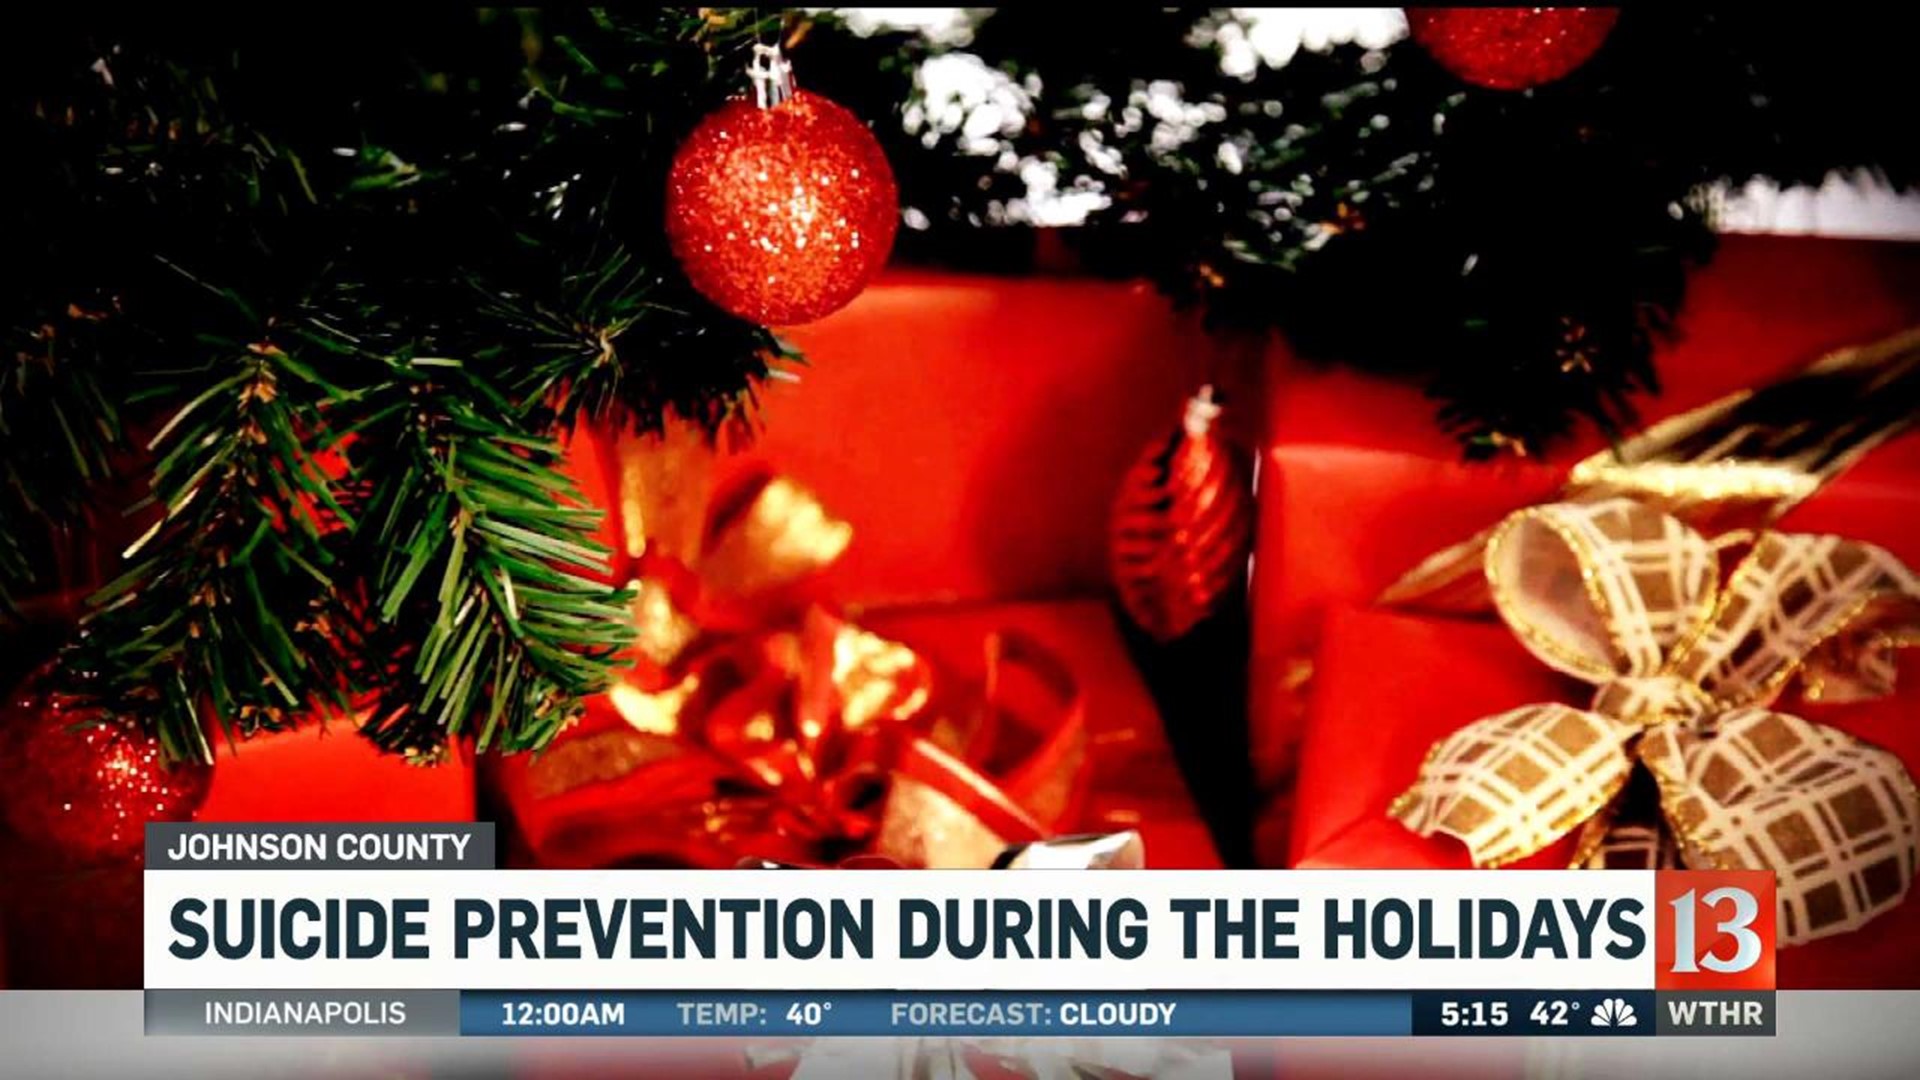 Suicide prevention during holidays